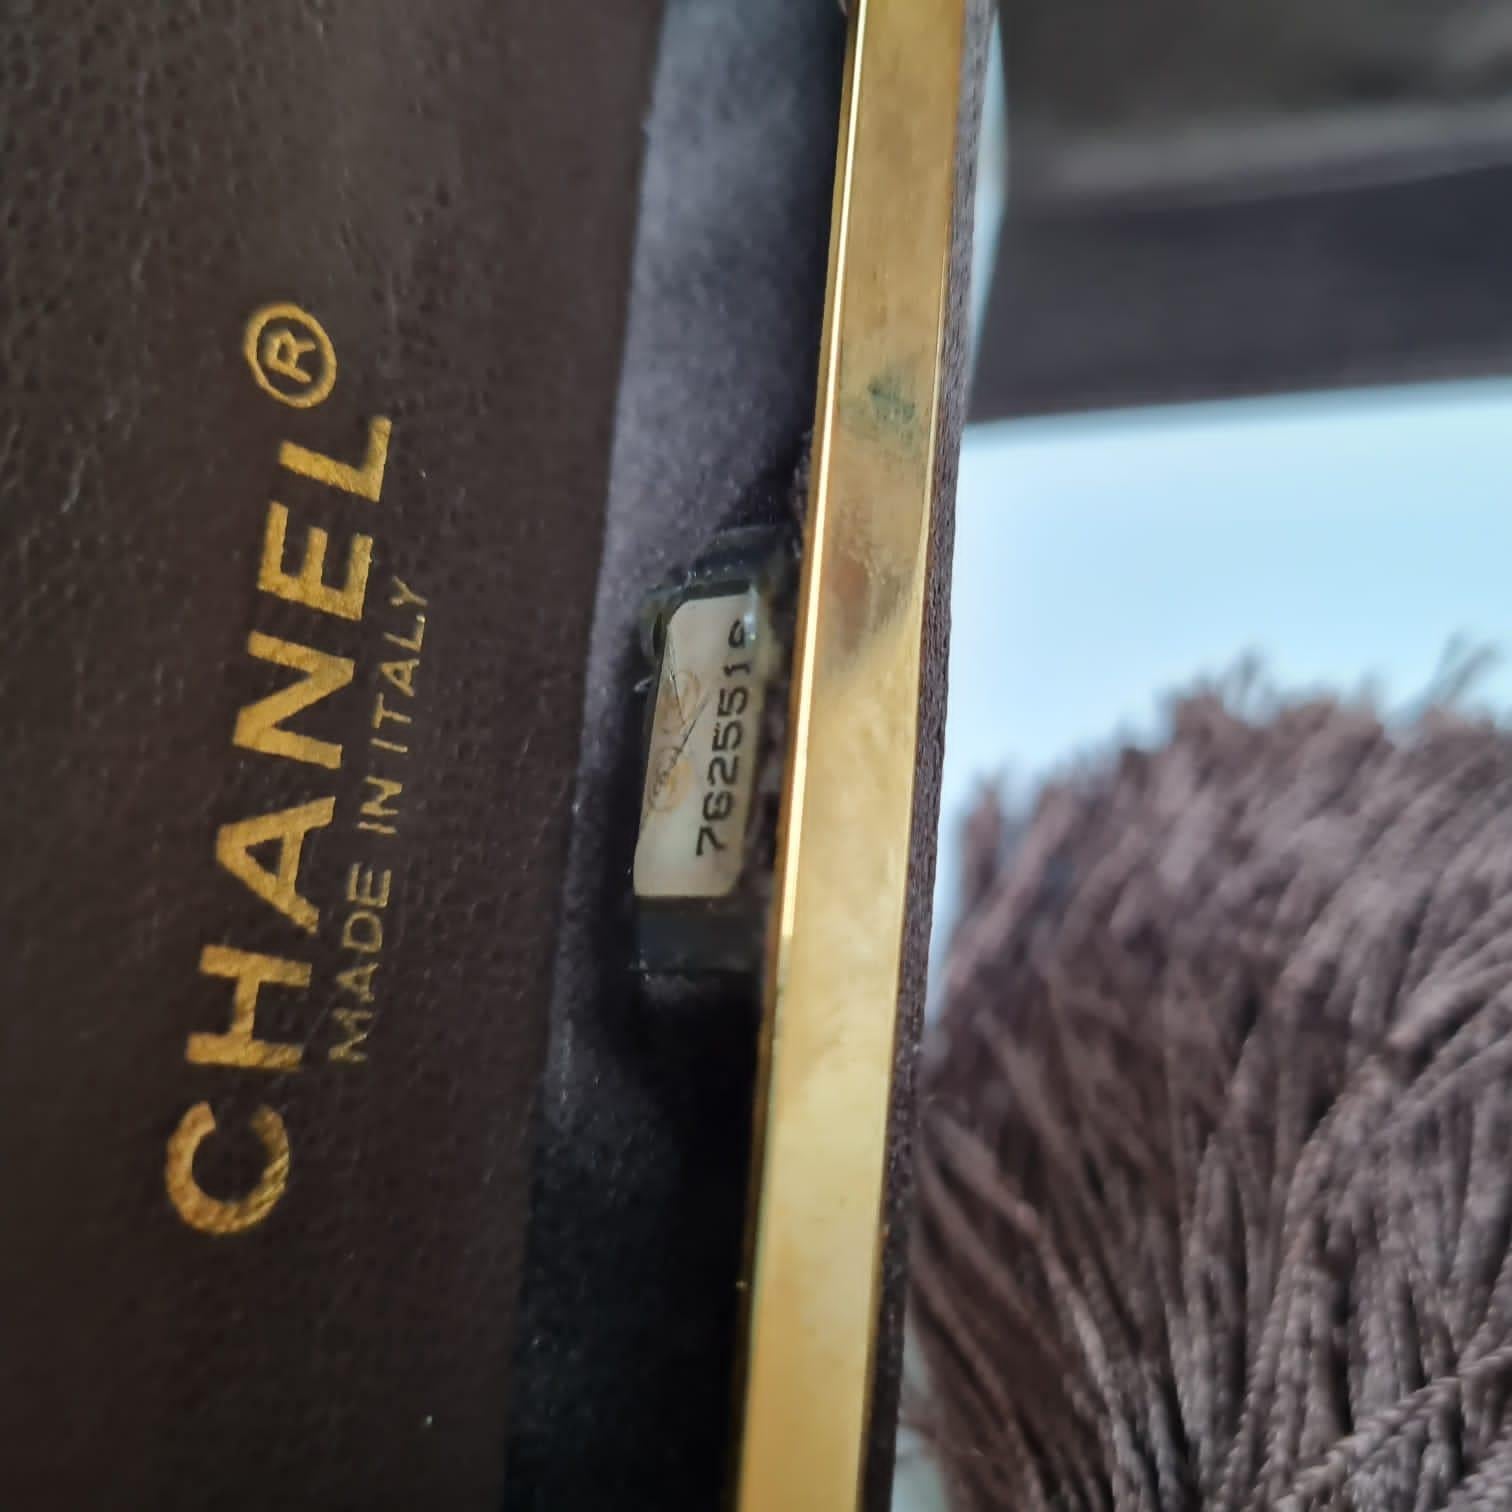 Rare Tortoiseshell Chanel clutch with tassel. Hairline scratches on the surface as seen on pictures. There is a mark on the mirror due to storage. Other than that still in good vintage condition. Beautiful brown satin lining. Series #7. Comes with